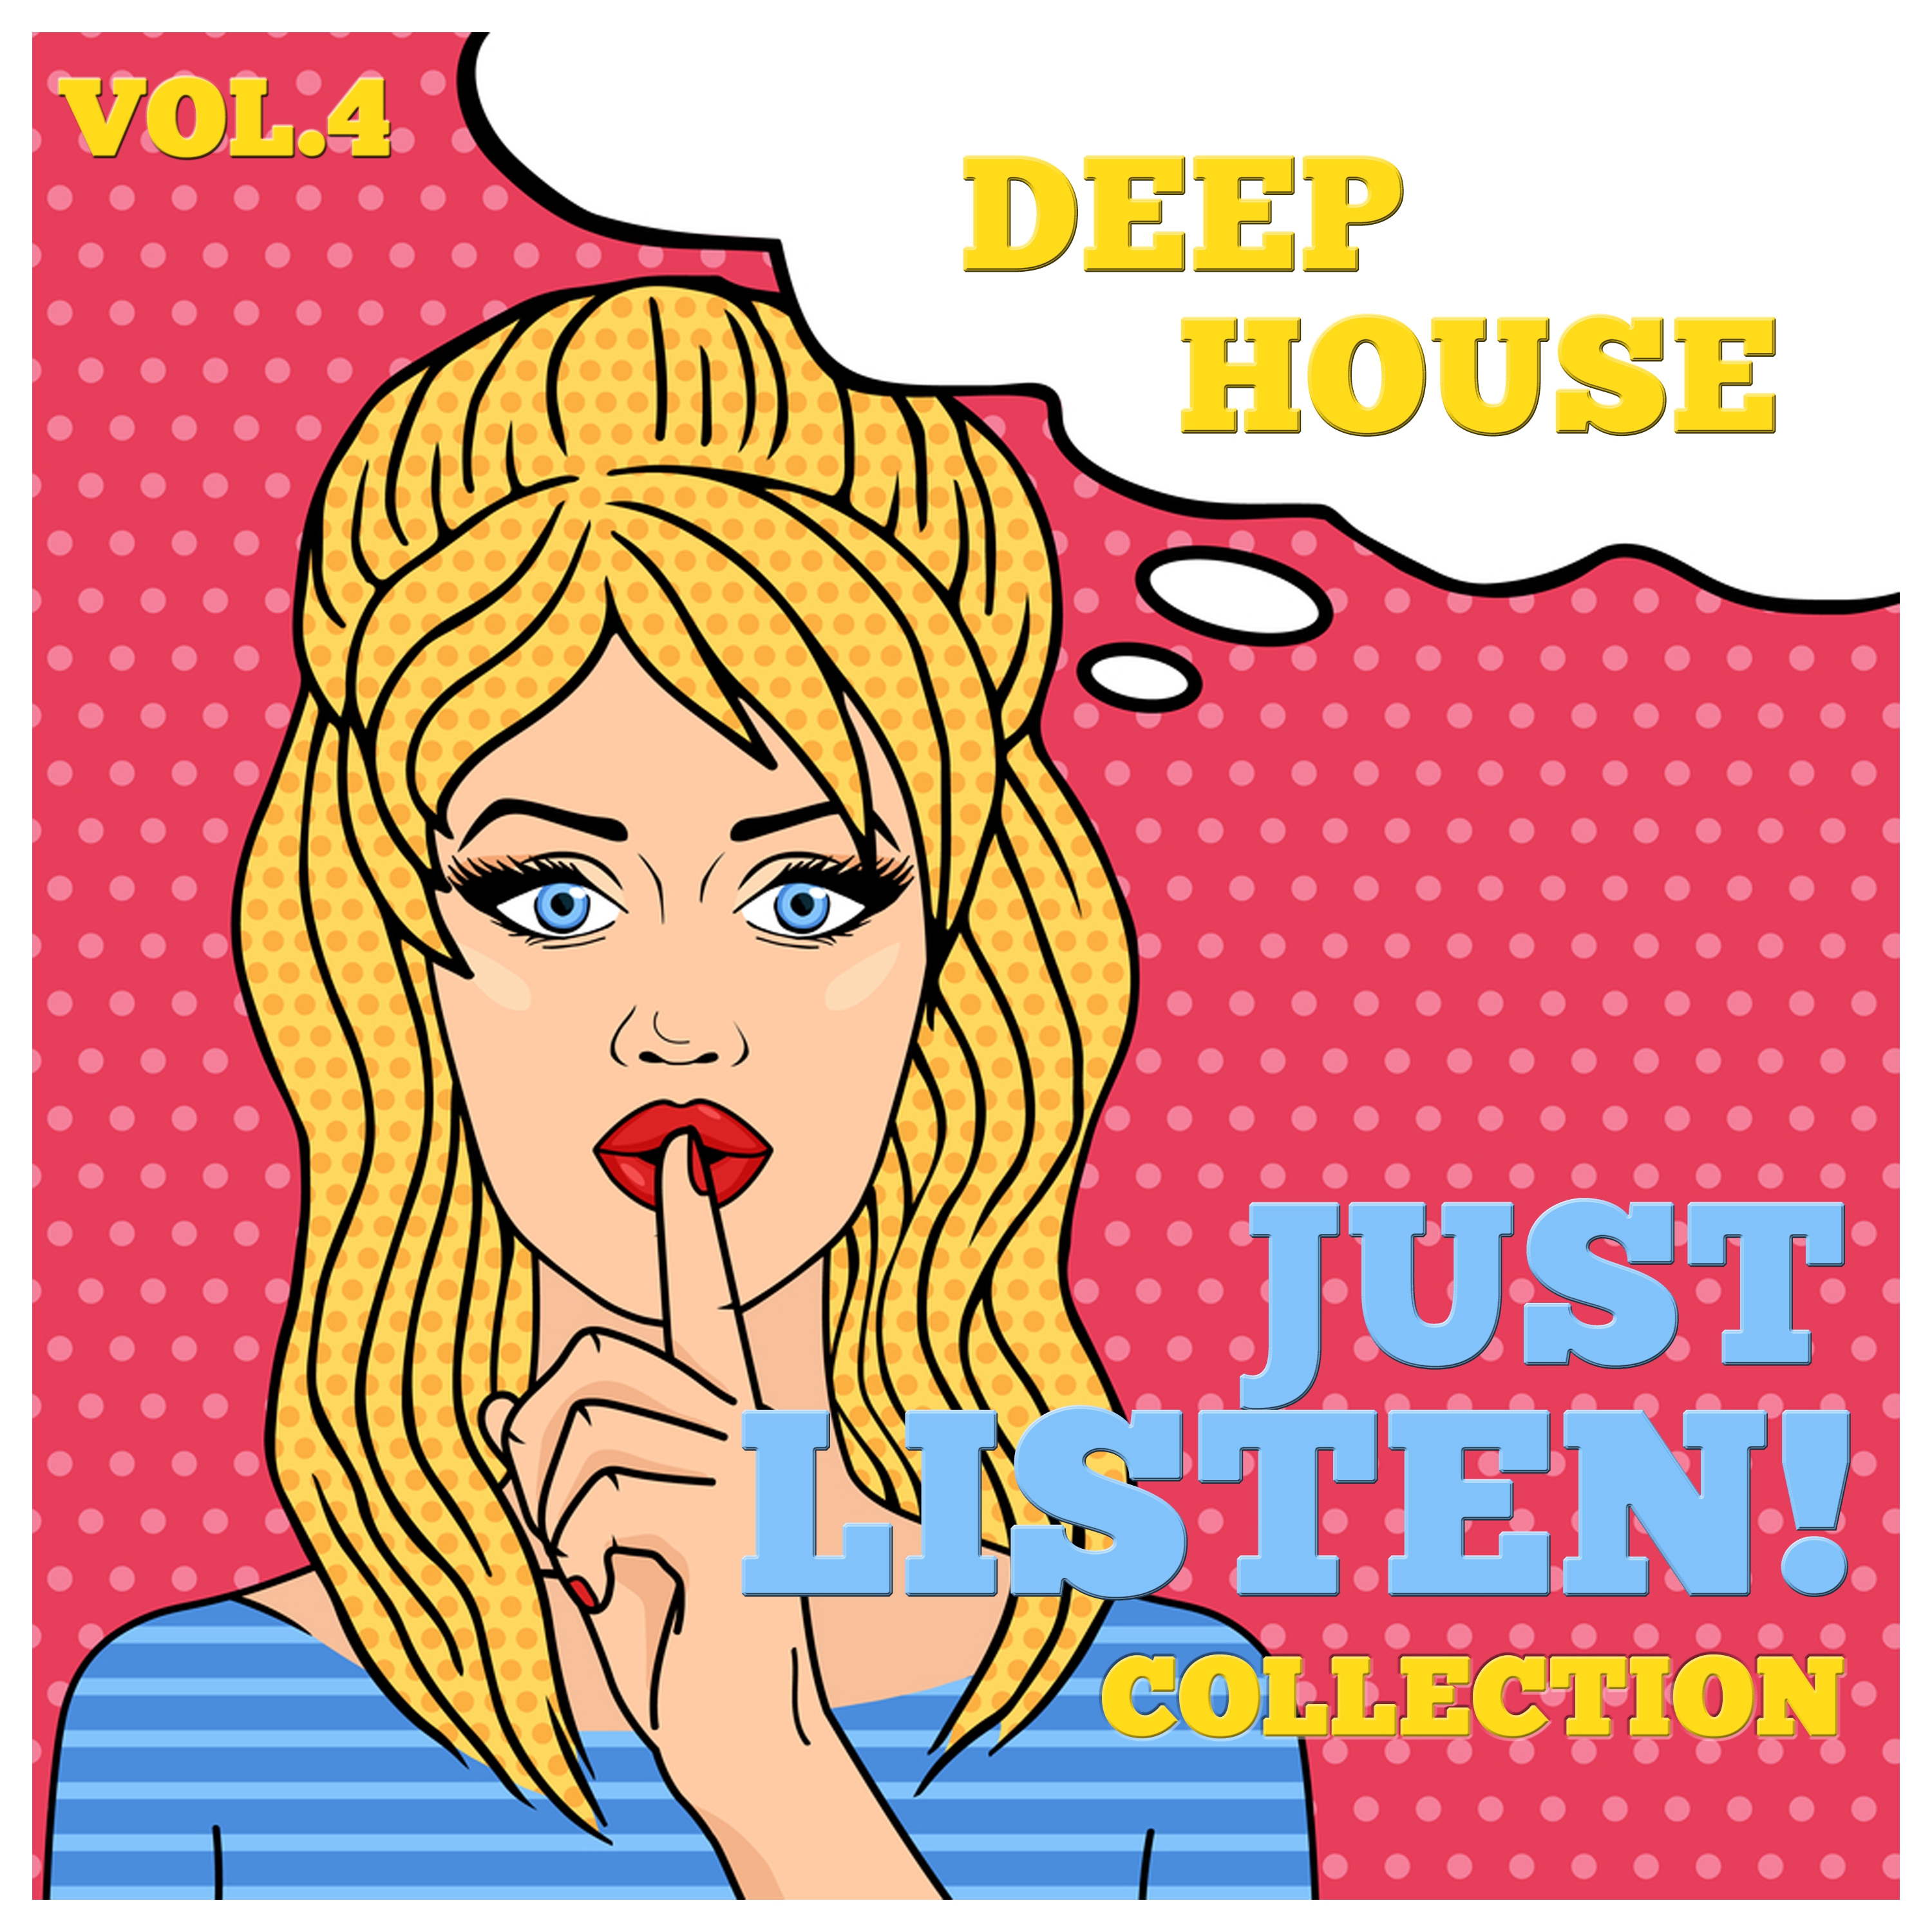 Just Listen! Collection, Vol. 4 - Finest Selection of Deep House